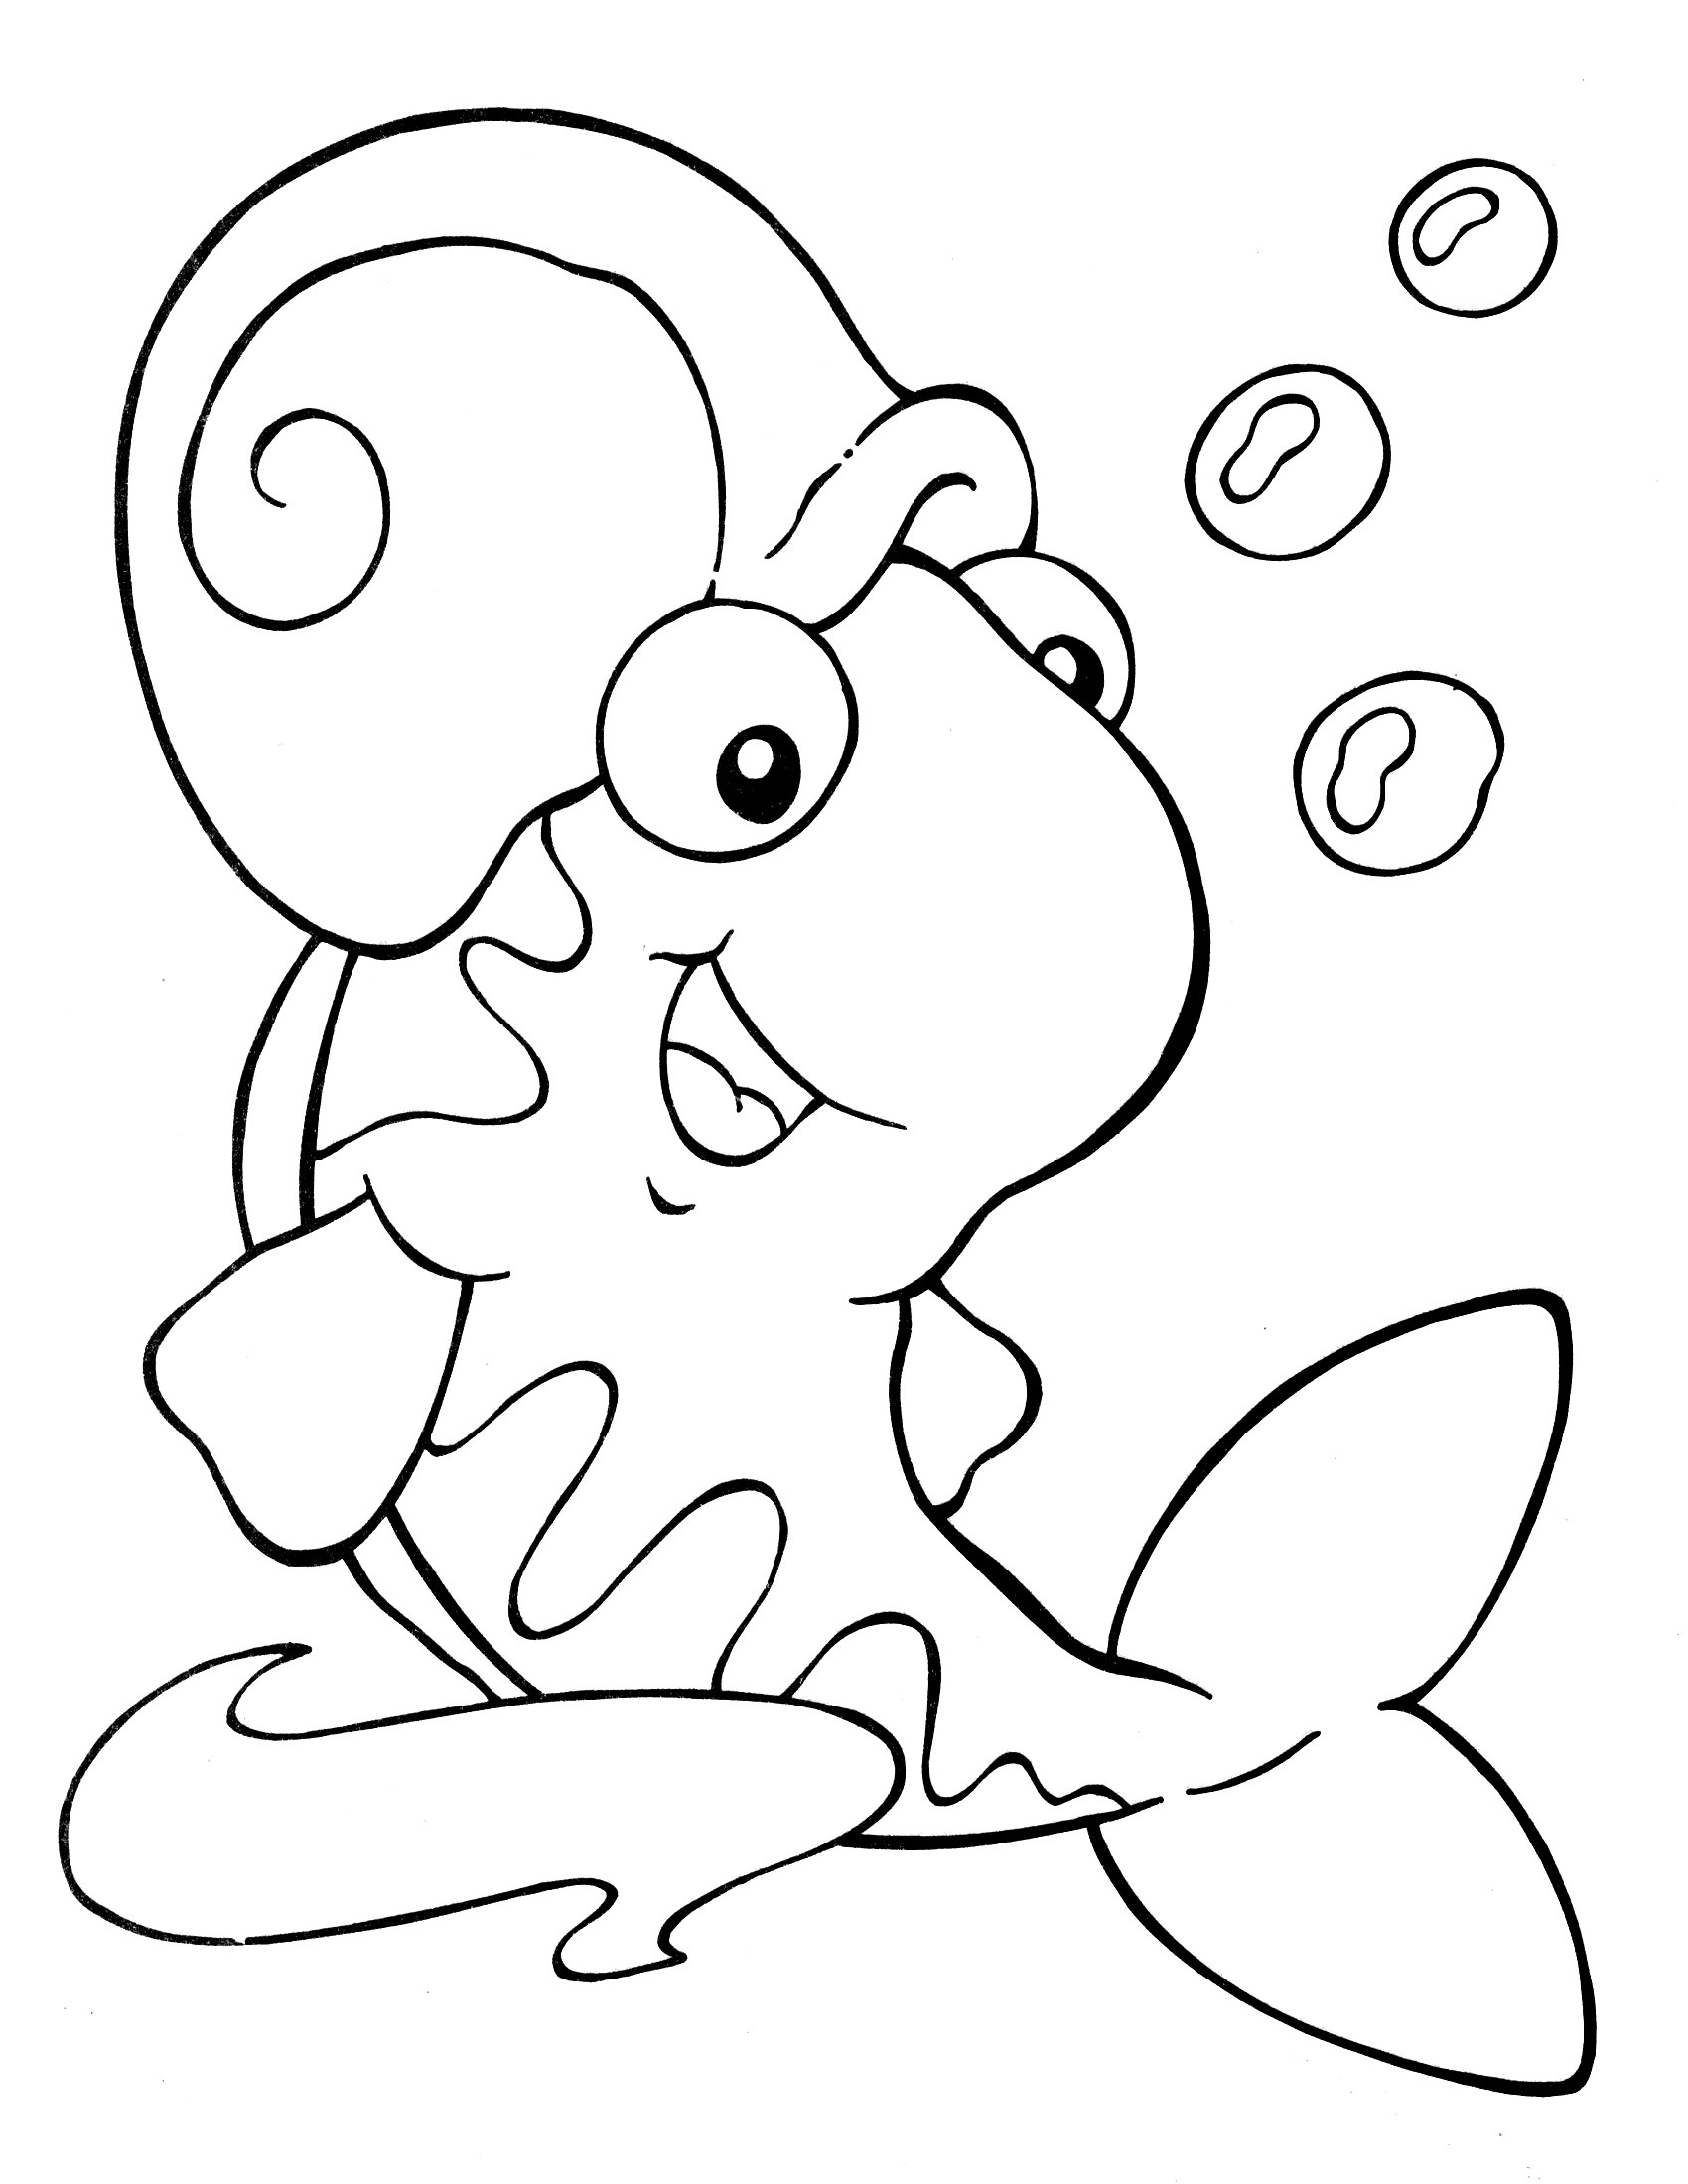 Crayola Fish Coloring Pages 45 Artistic Crayola Coloring Pages